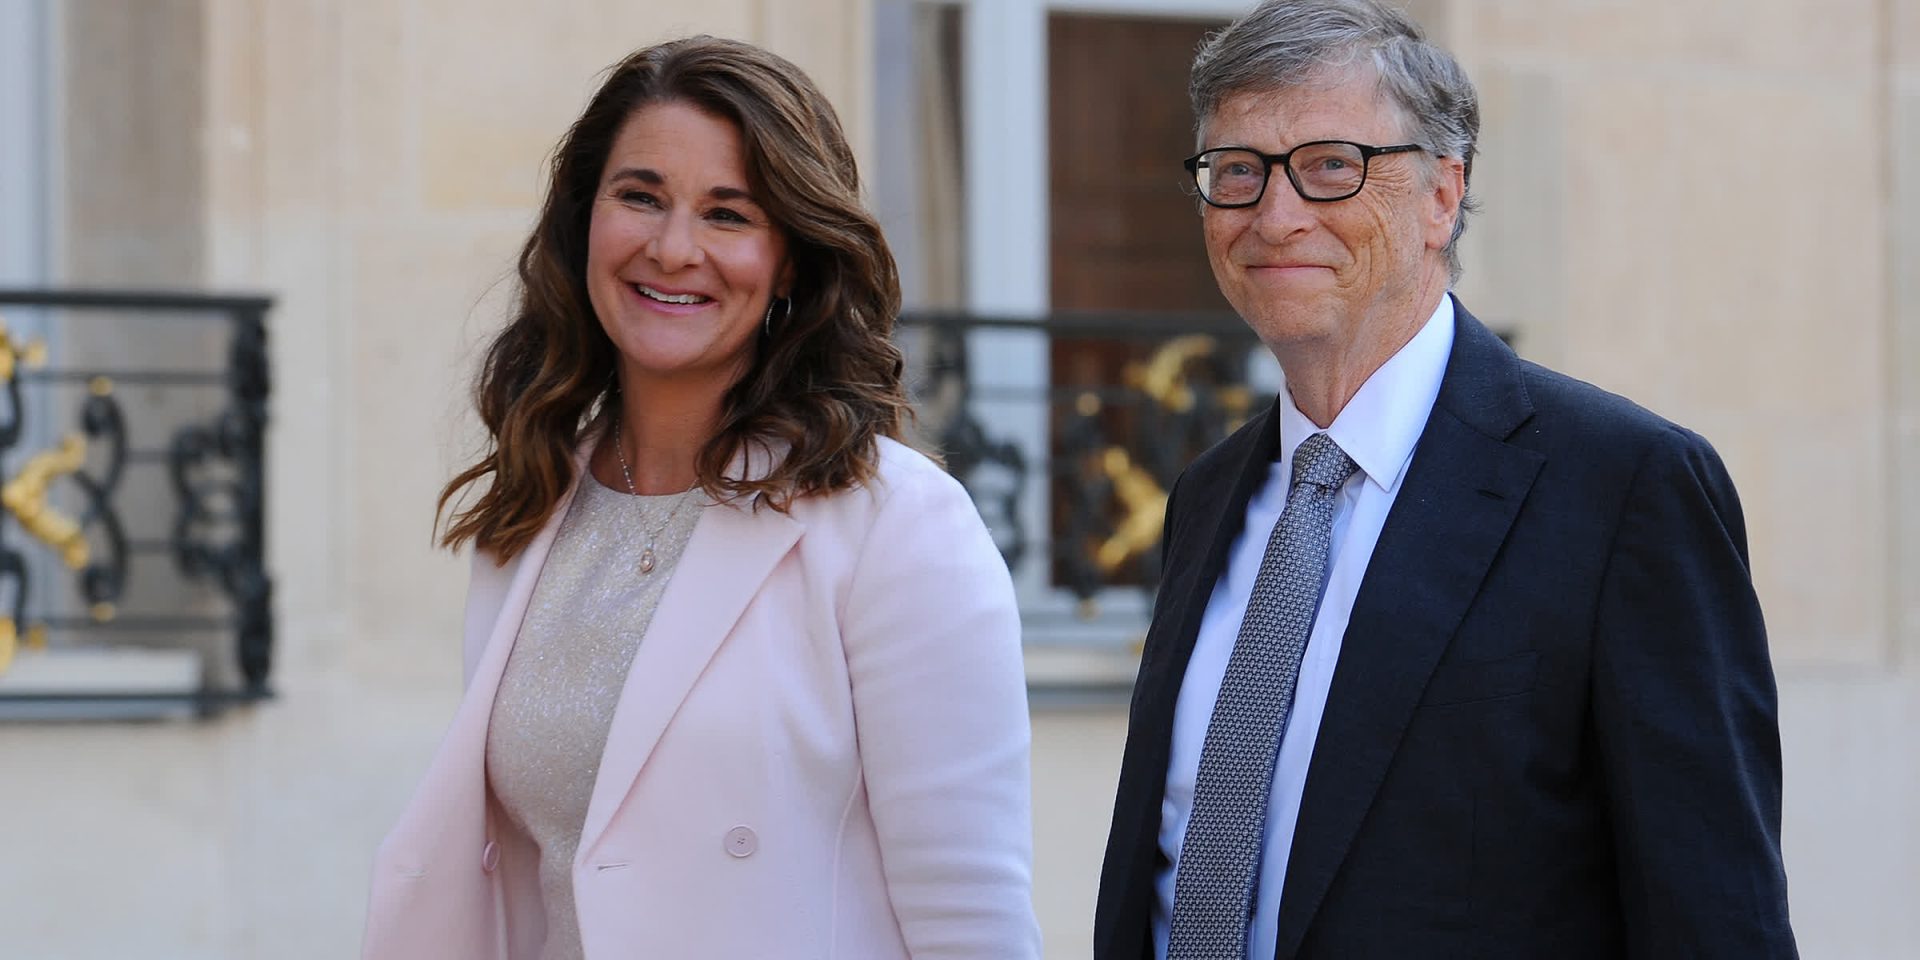 Invoice and Melinda Gates to luxuriate in a examine a divorce after 27 years of marriage